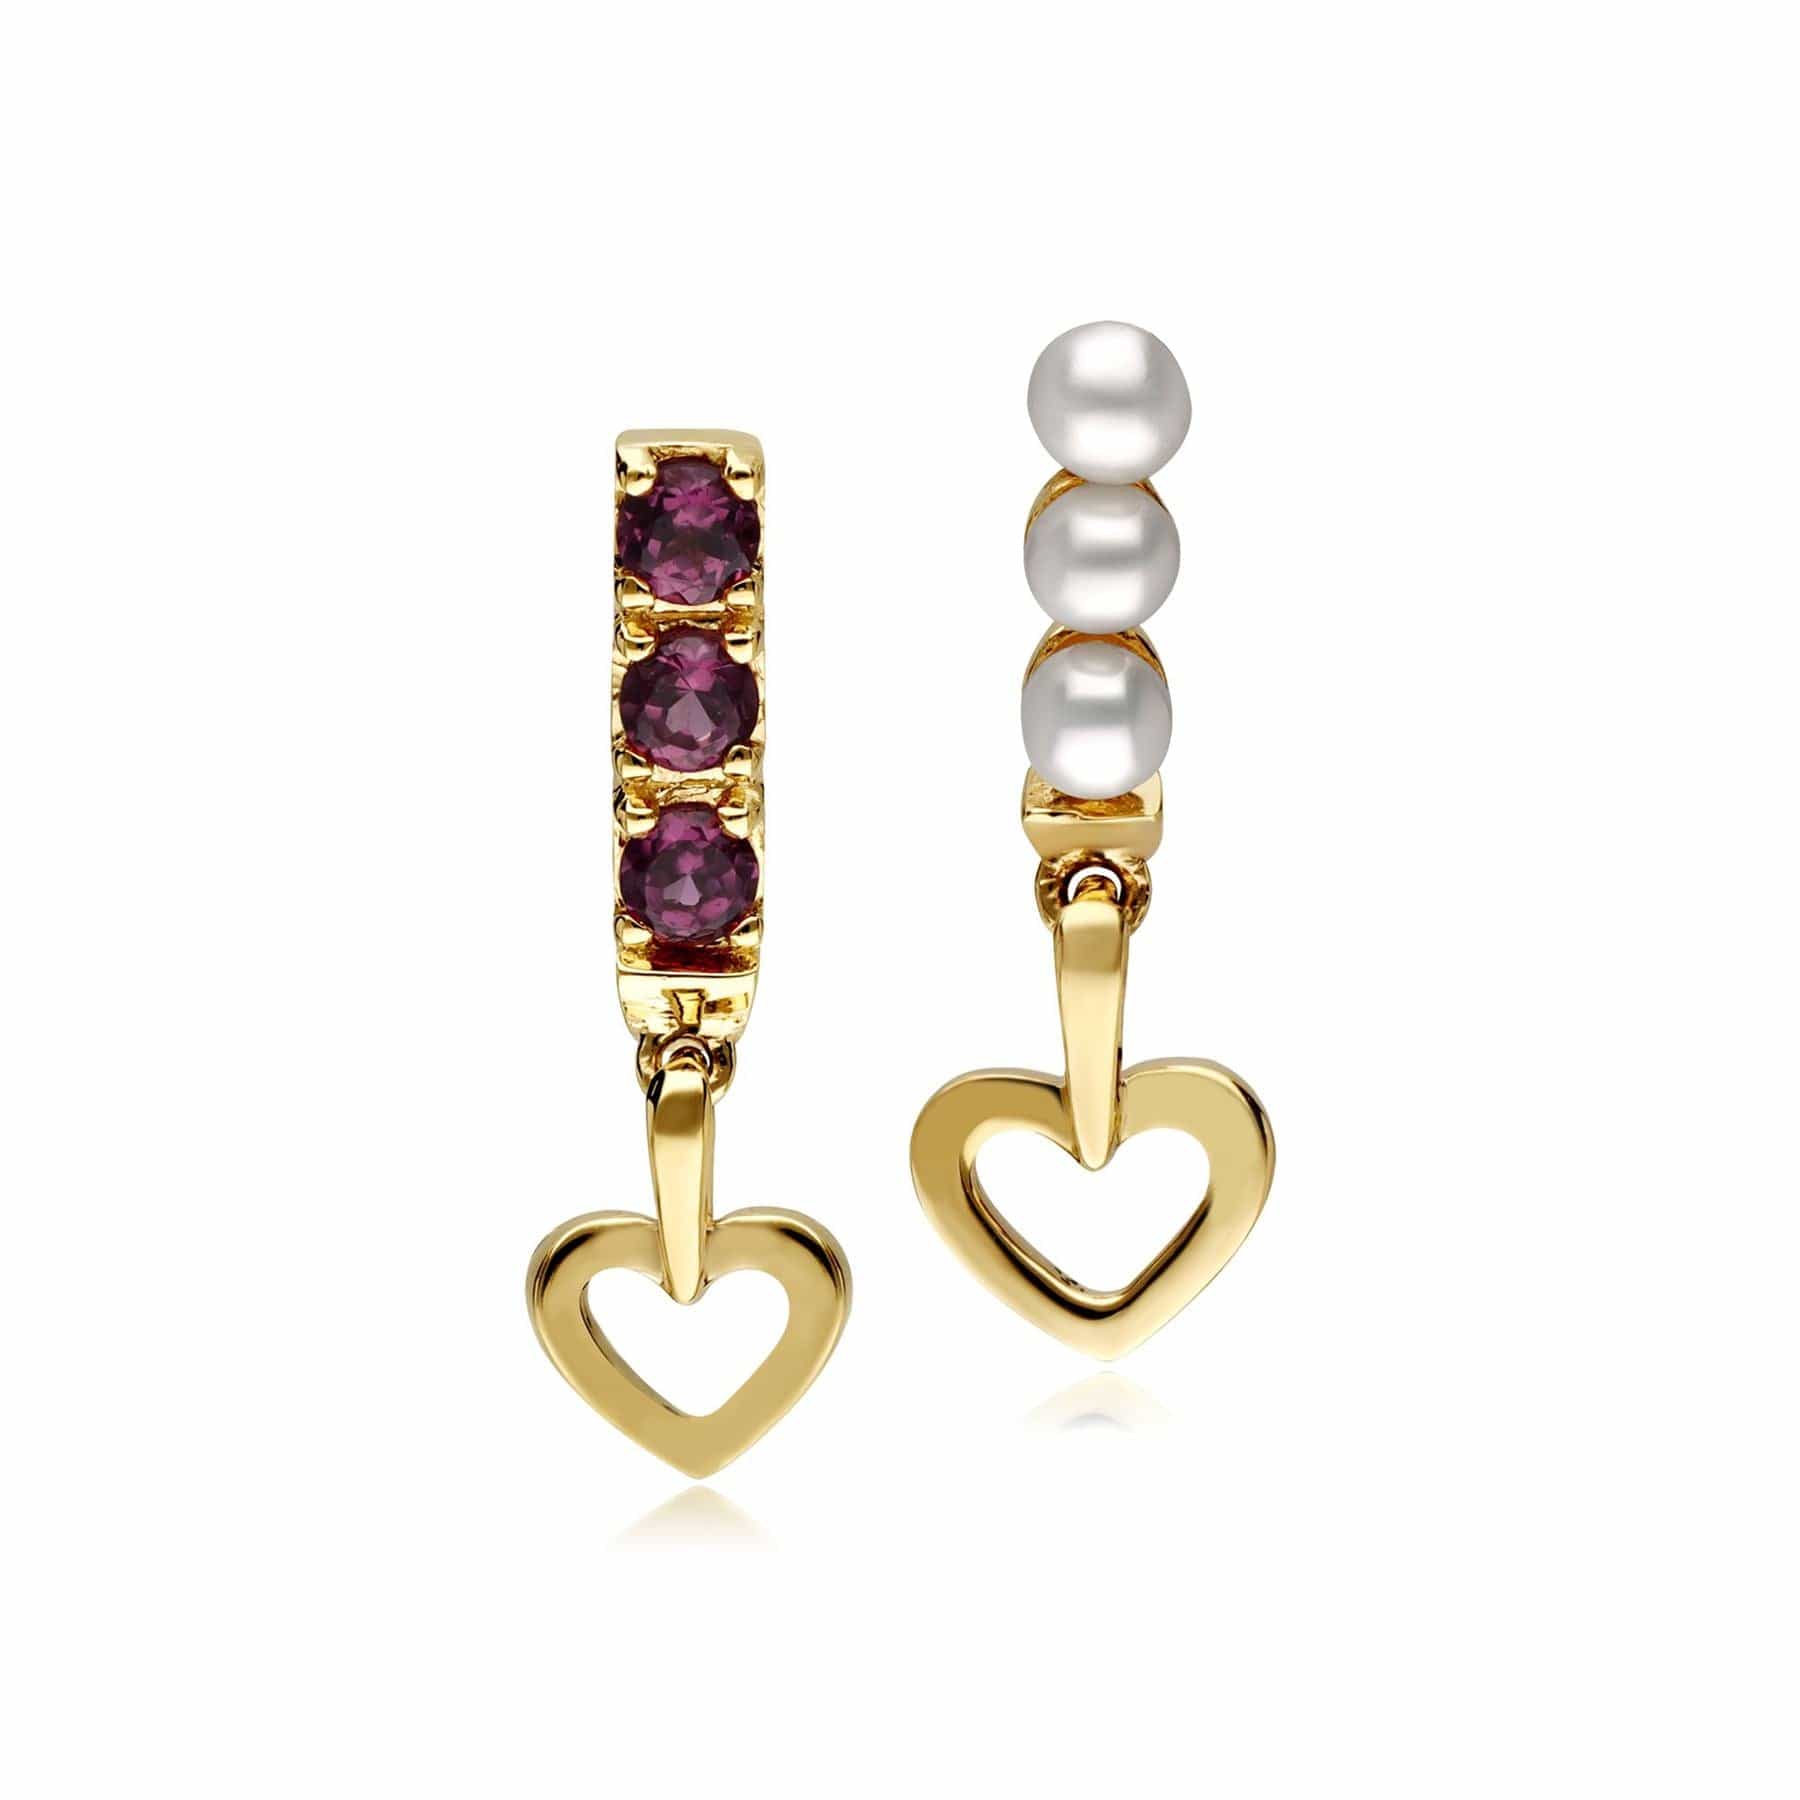 133E4182019 Cultured Freshwater Pearl & Rhodolite Mismatched Heart Drop Earrings In 9ct Yellow Gold 1